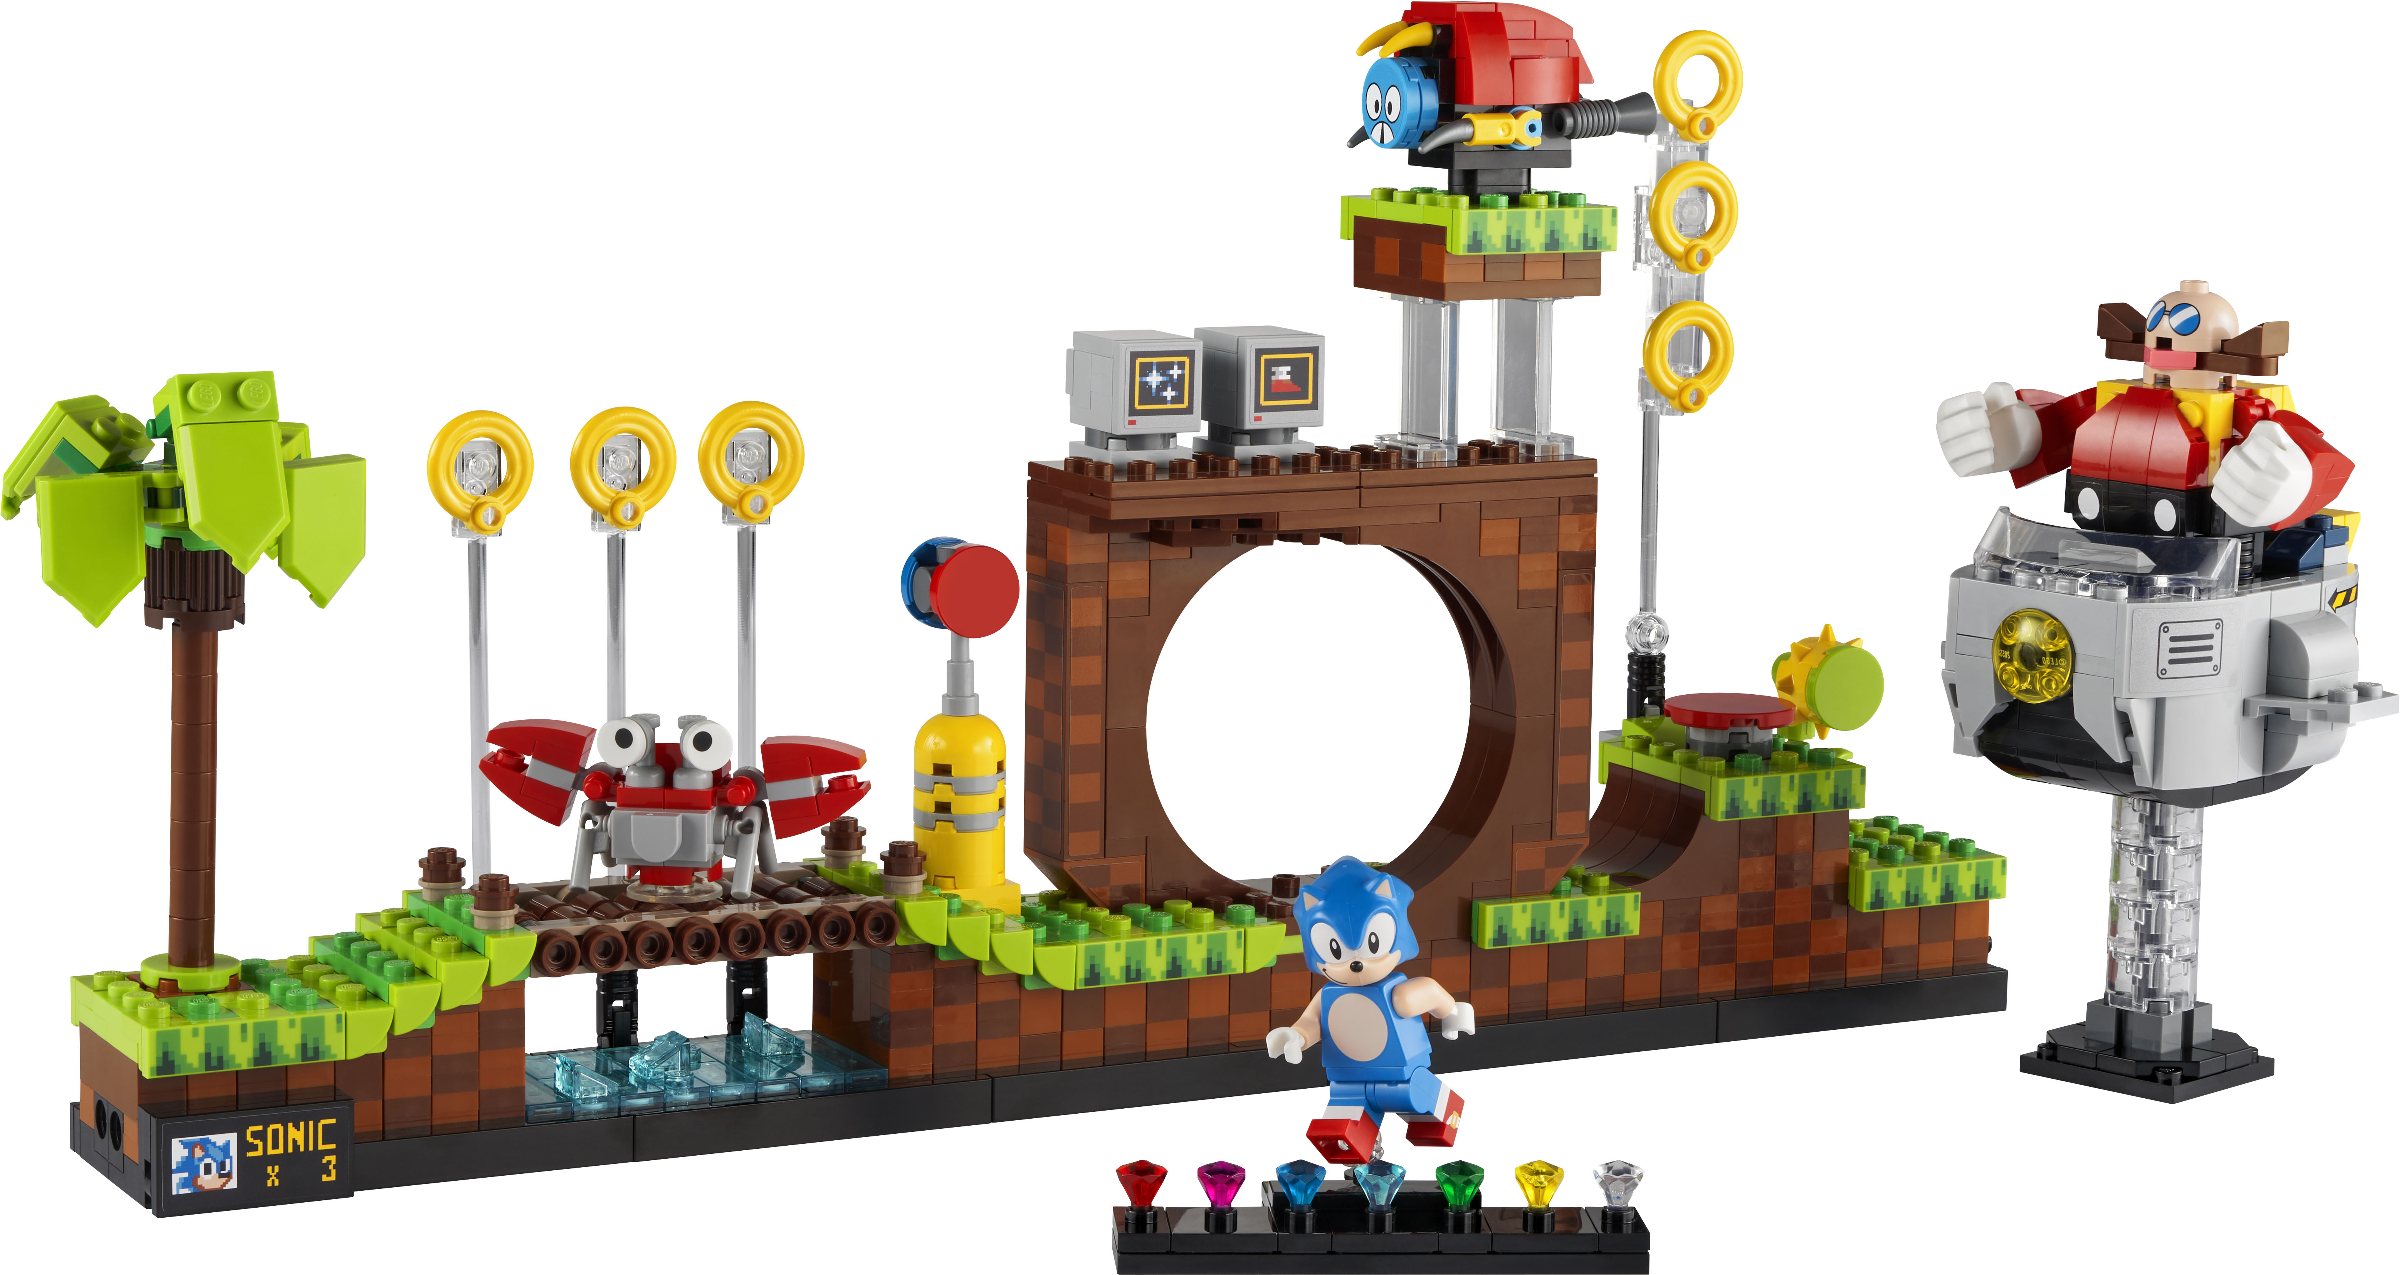 Knuckles, Shadow and Big the Cat shown in Sonic's Lego Dimensions level